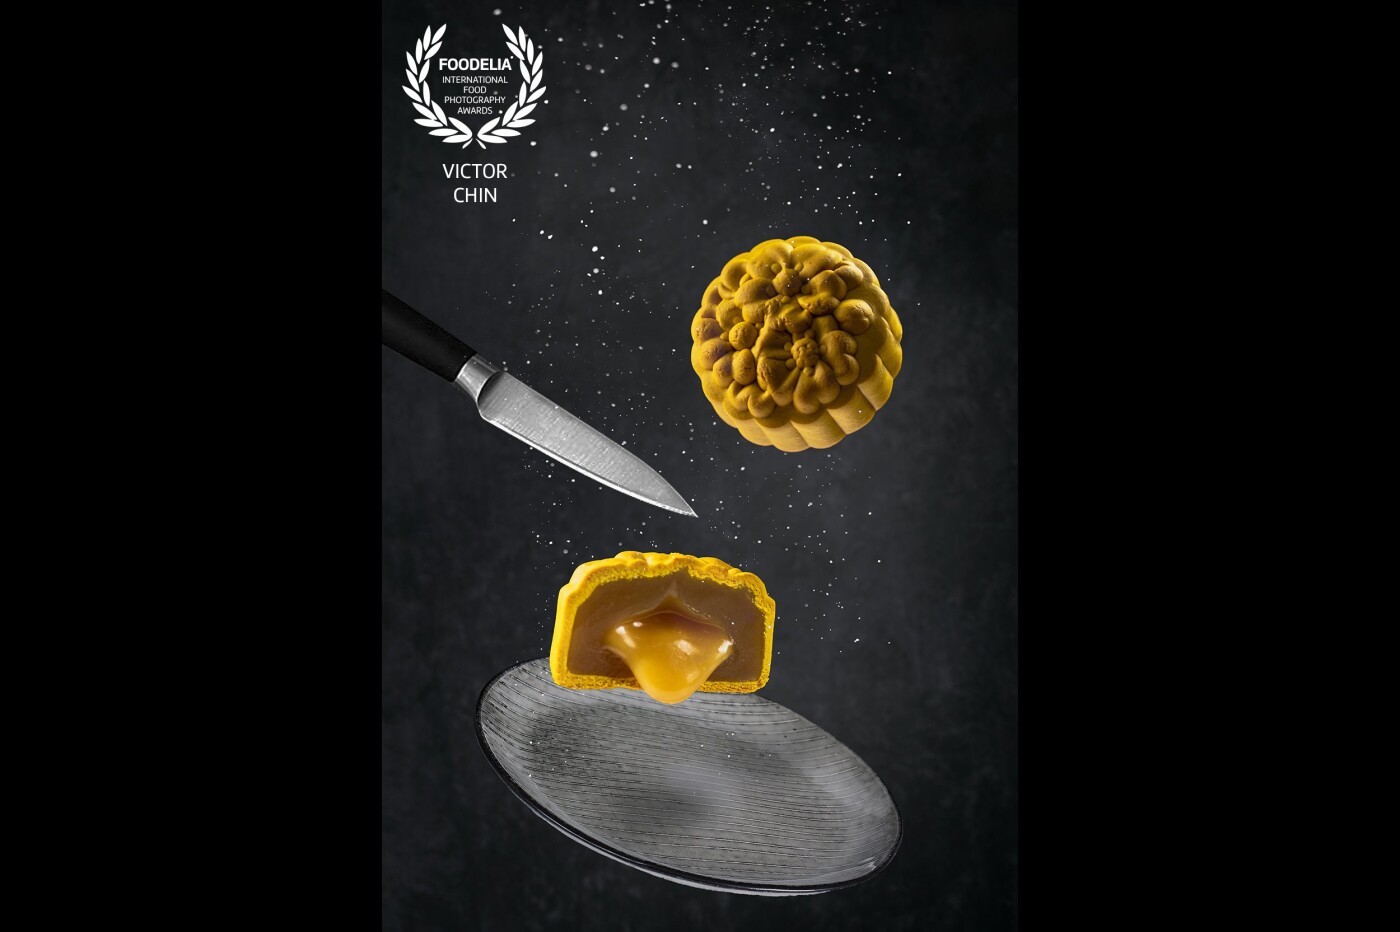 This photo was taken for a local bakery shop. This is a durian paste mooncake. Is a new product launched for the Chinese Festive Season, Mid-Autumn Festival also known as Mooncake Festival? In Chinese culture, roundness symbolizes completeness and togetherness. A full moon symbolizes prosperity and reunion for the whole family. Round mooncakes complement the harvest moon in the night sky at the Mid-Autumn Festival. The mooncake is not just-food.